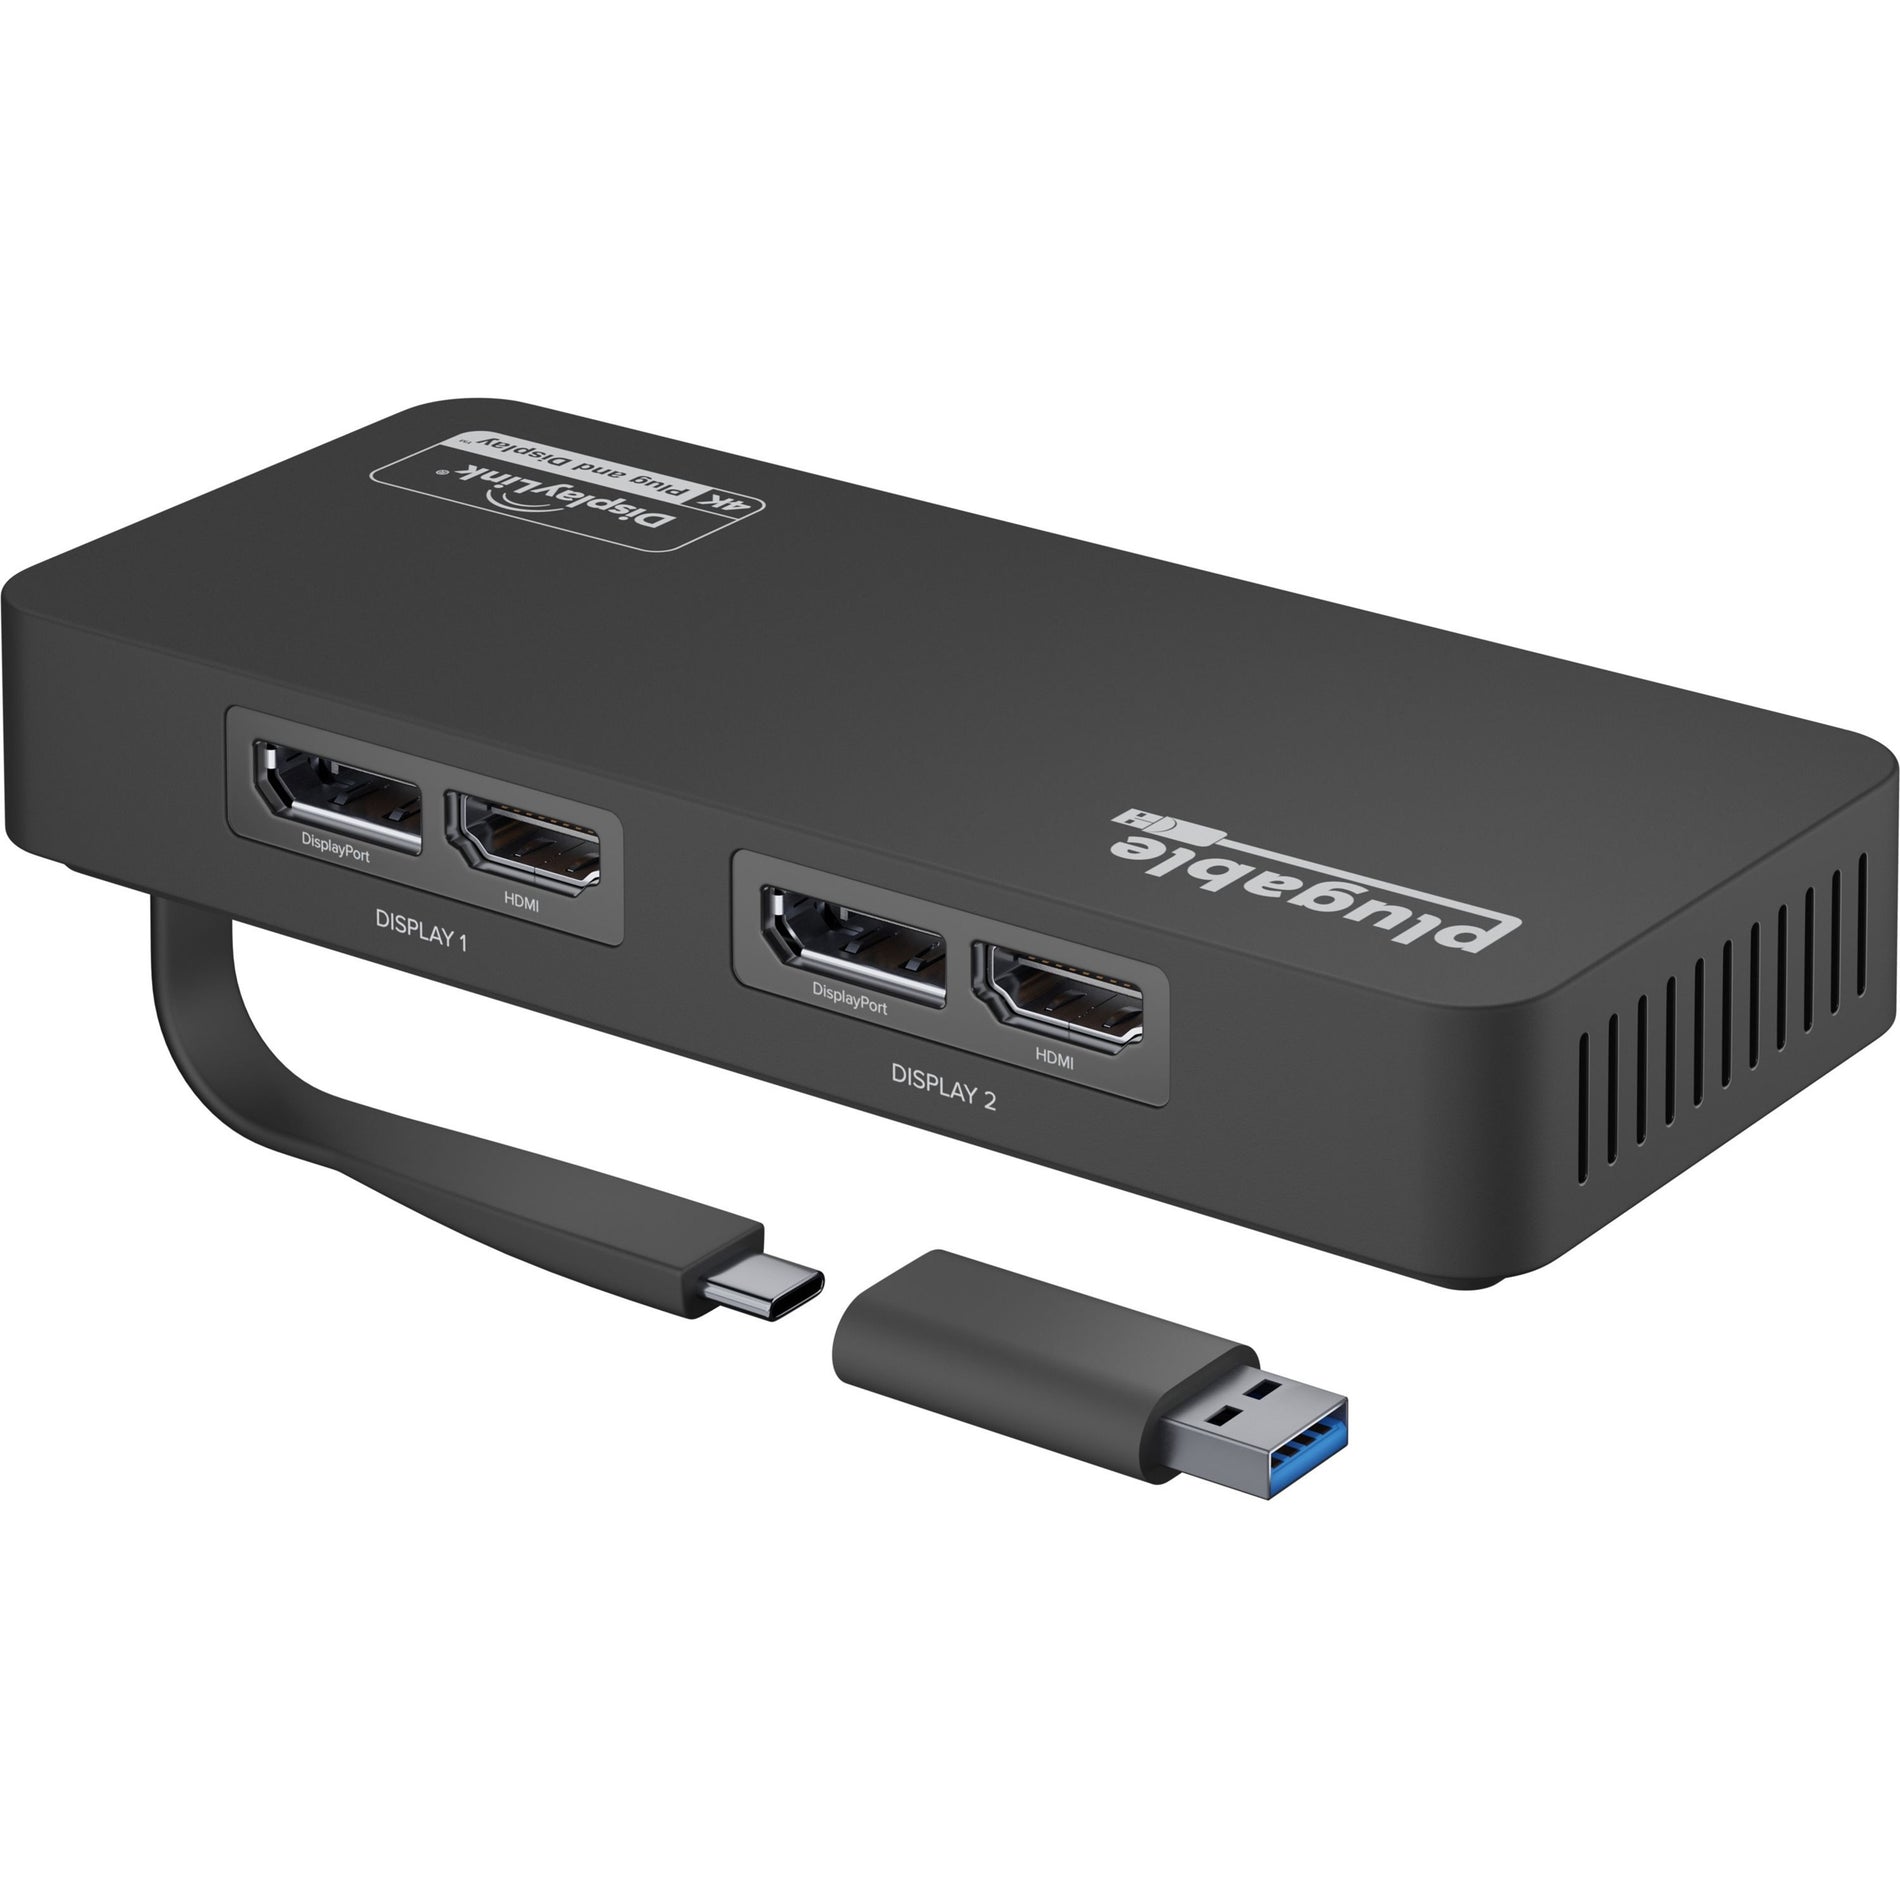 Plugable USBC-6950U USB 3.0 and USB-C 4K DisplayPort and HDMI Dual Monitor Adapter, Connect Multiple Monitors with Ease